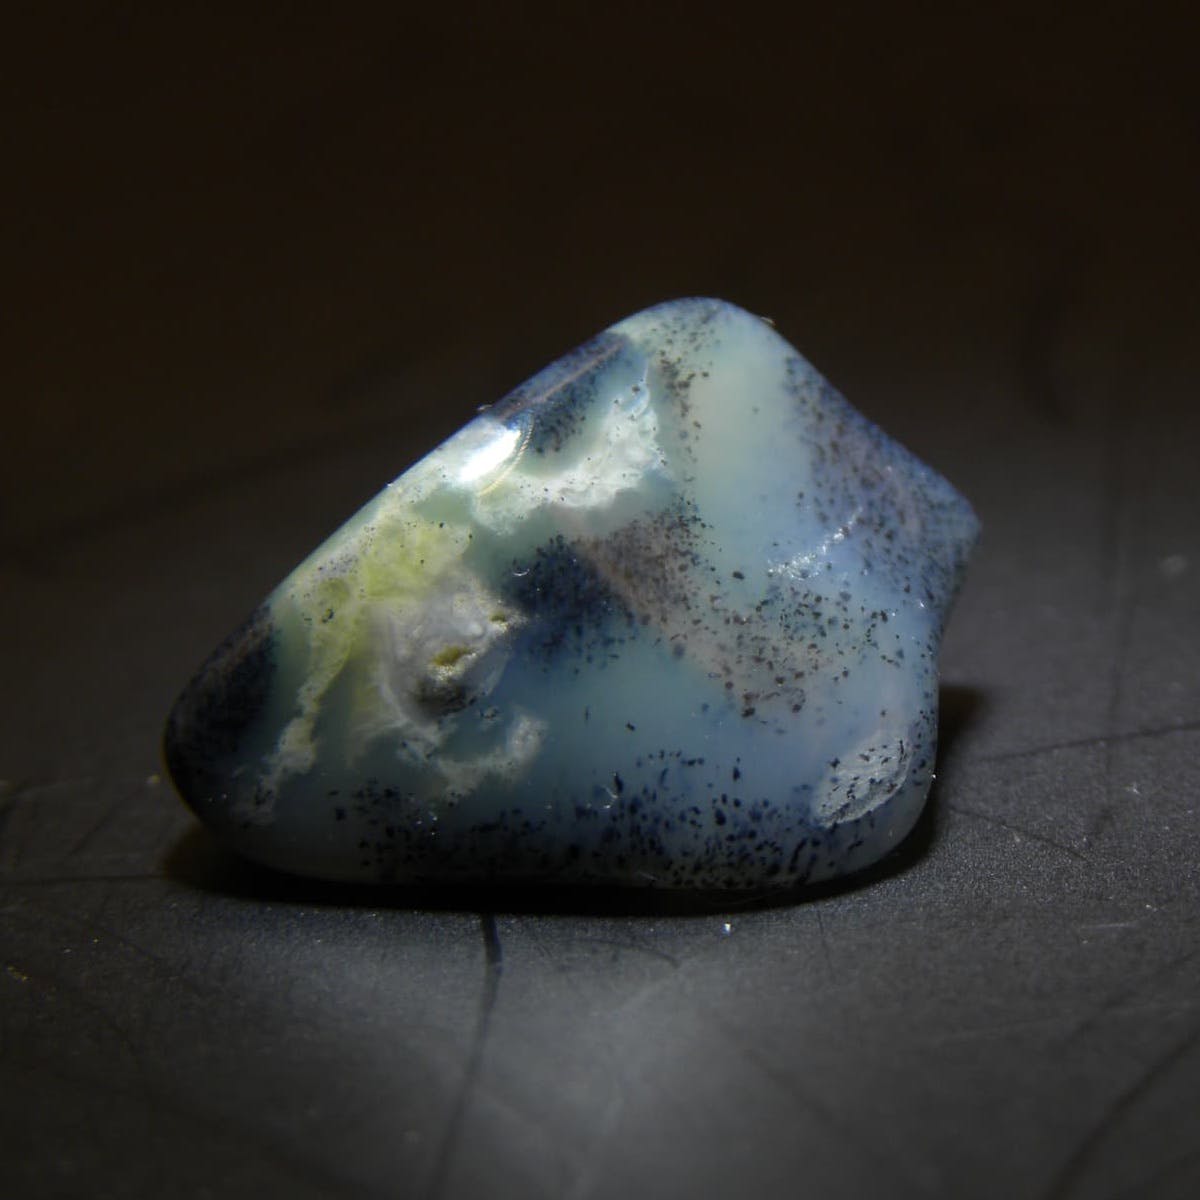 Is This an Opal?